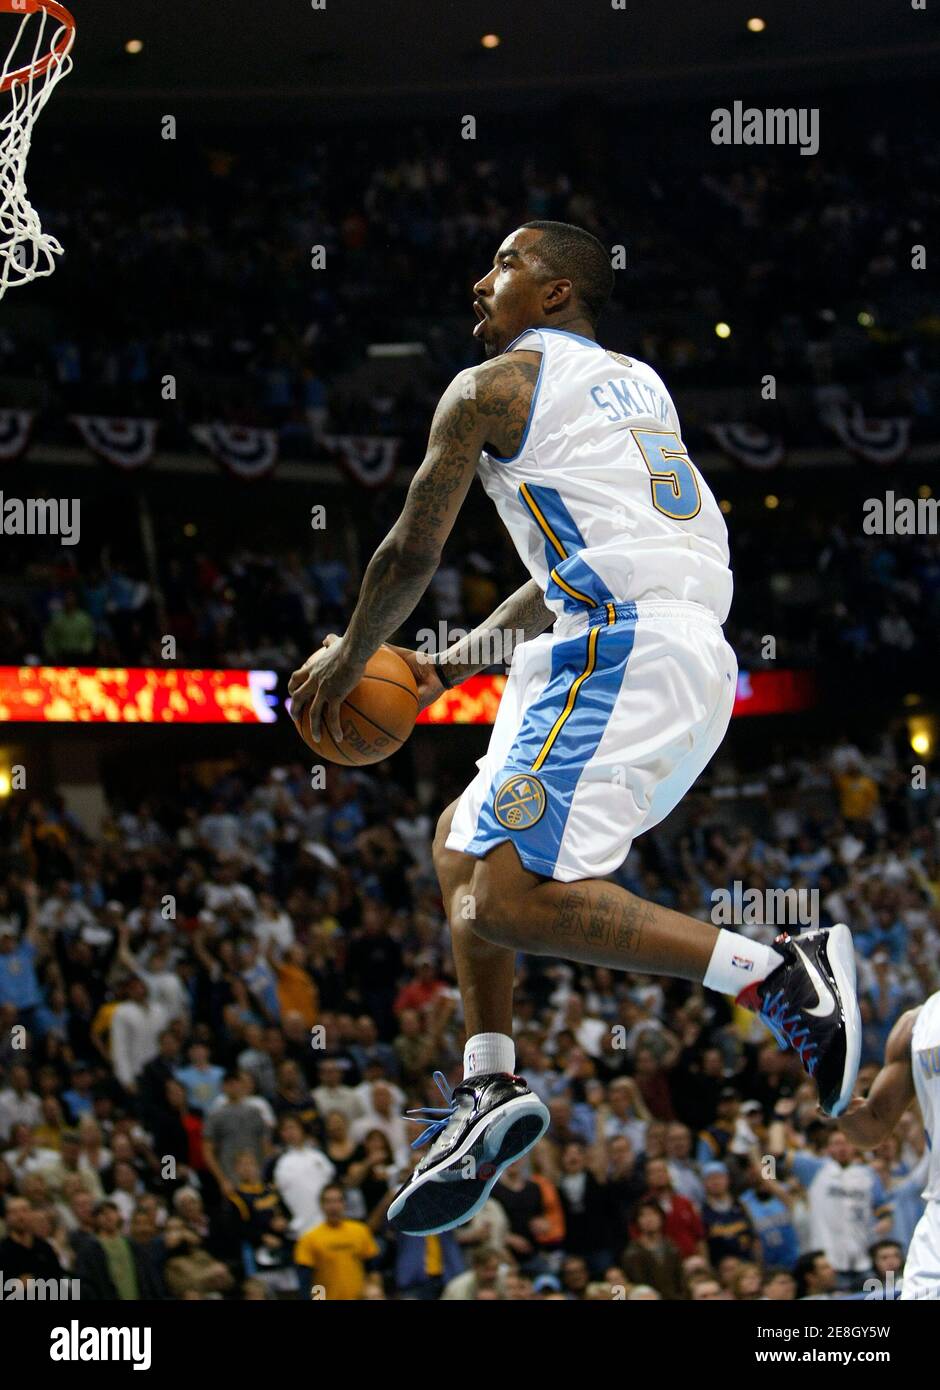 Denver Nuggets guard J.R.Smith flies toward the hoop before he stuffed a basket against the Utah Jazz in the fourth quarter in Game 6 of their NBA Western Conference playoff series in Denver April 28, 2010. REUTERS/Rick Wilking (UNITED STATES - Tags: SPORT BASKETBALL) Stock Photo